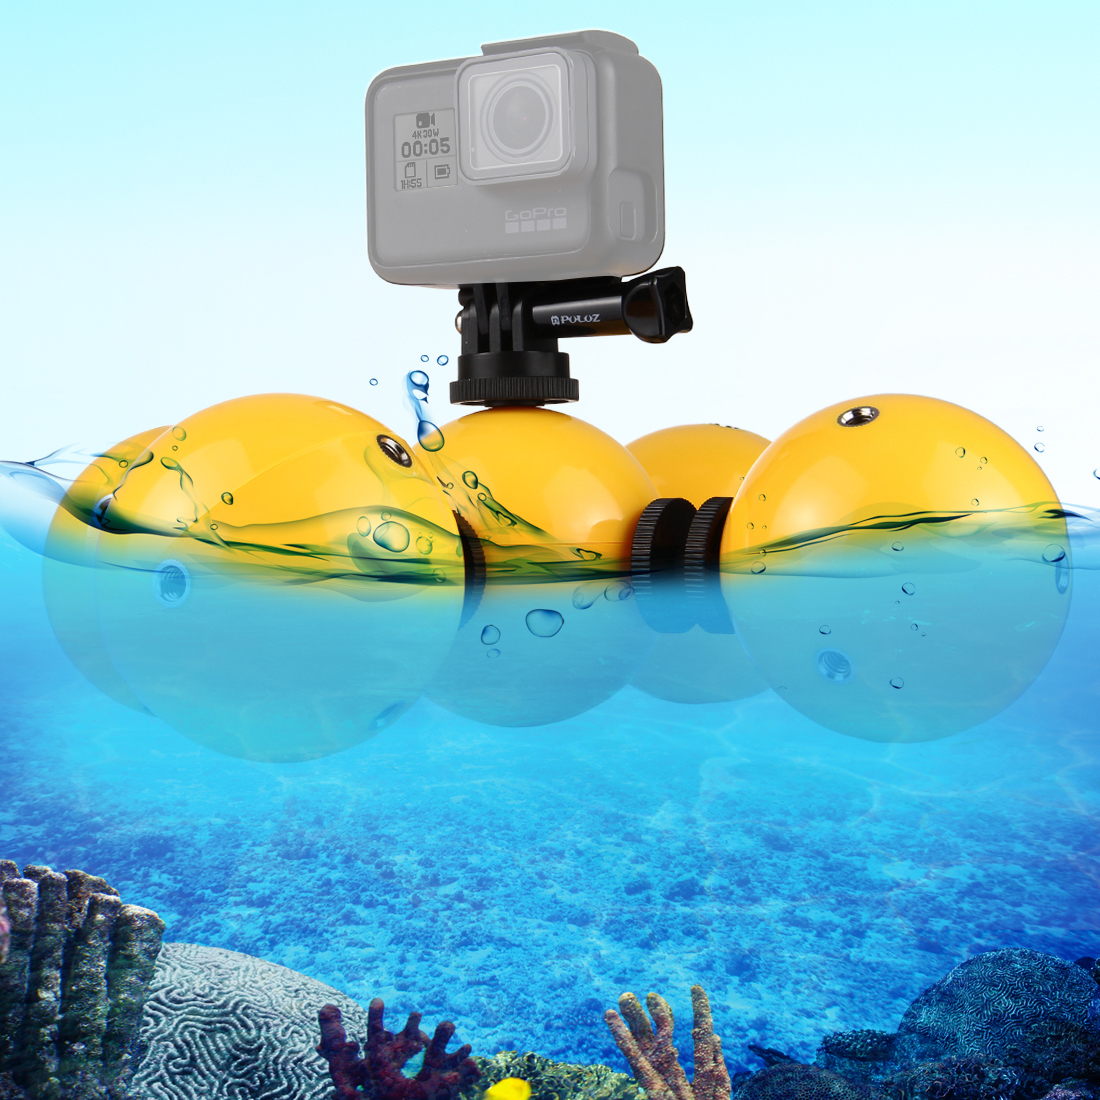 PULUZ 5pcs PULUZ Diving Floaty Bobber Ball Suit GoPro HERO6 /5 /5 Session /4 Session /4 /3+ /3 /2 /1, Xiaoyi and Other Action Cameras for Summer Swimming Skiing Surfing